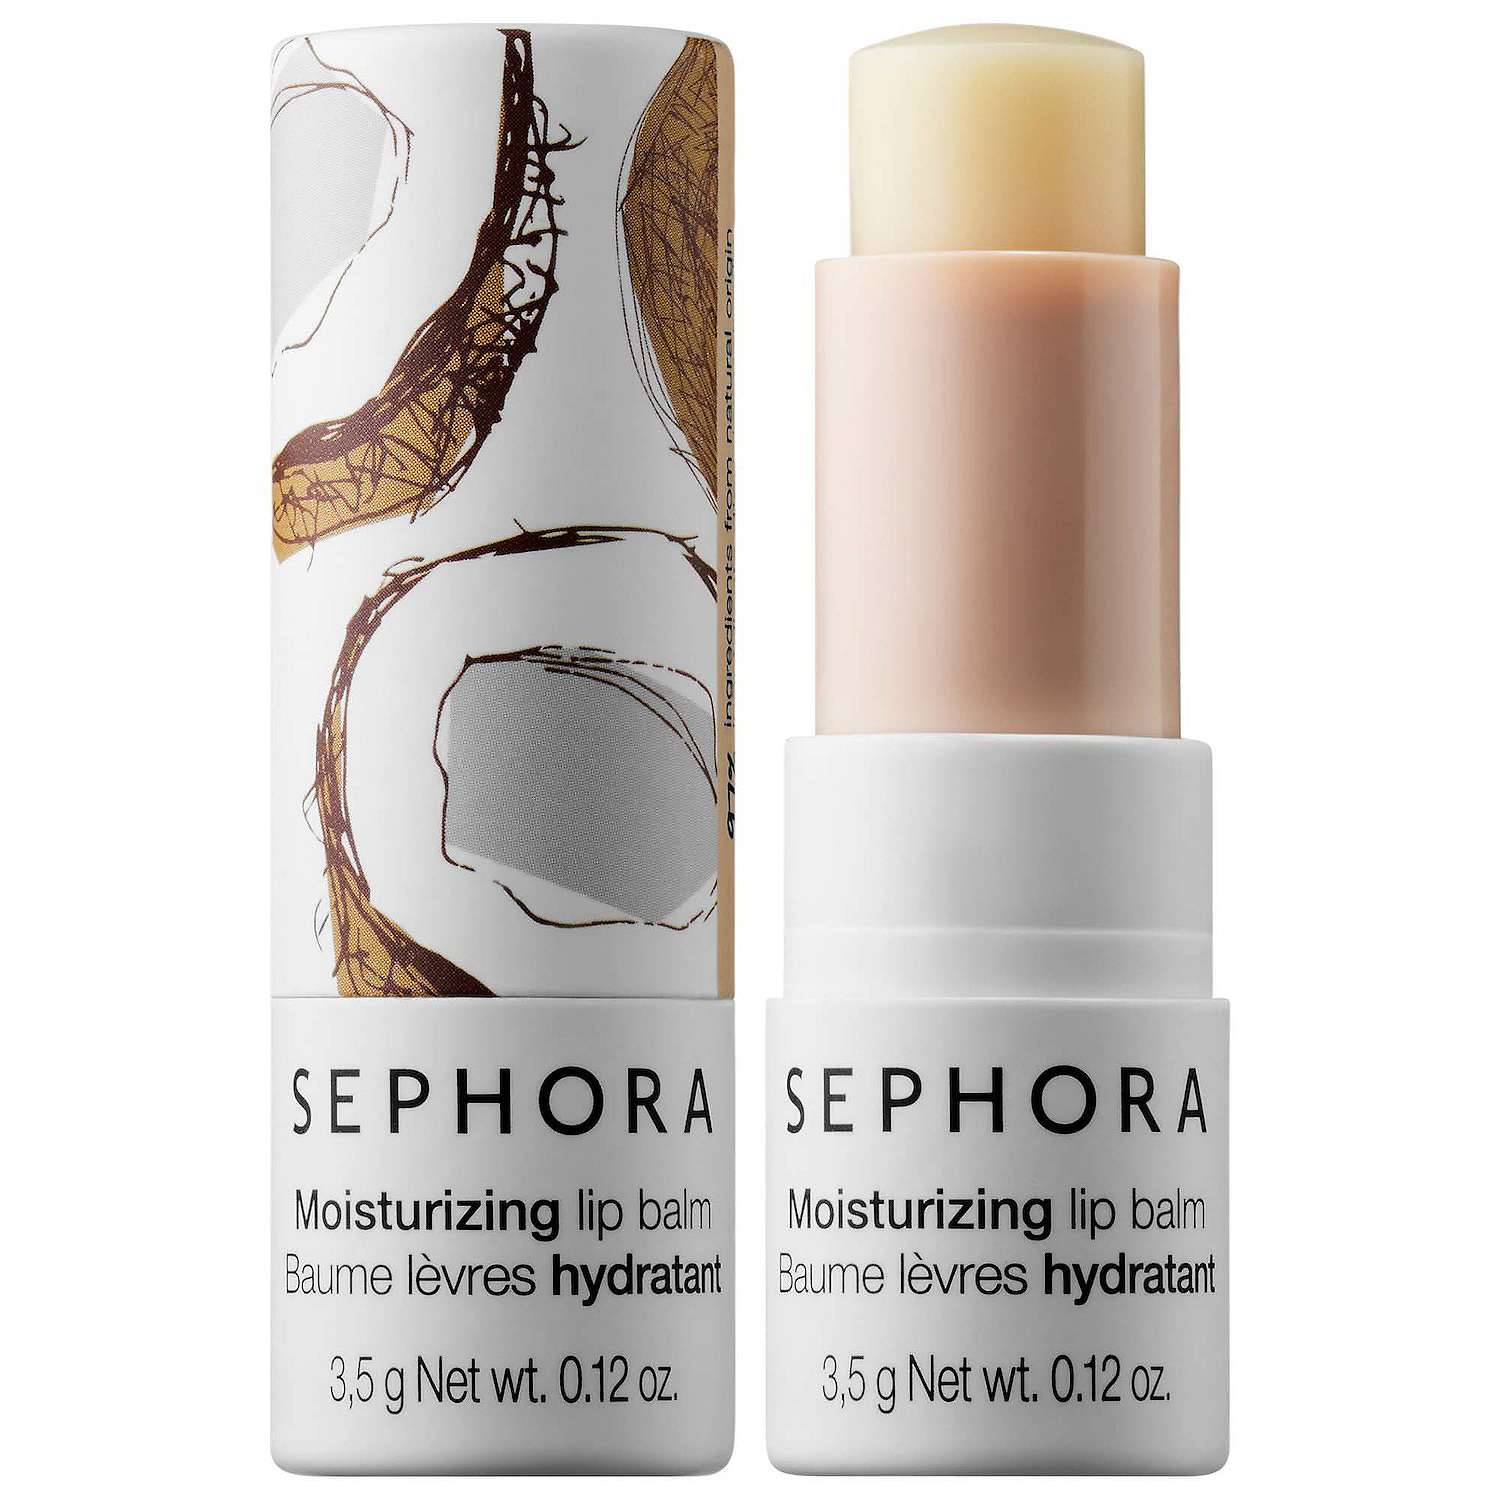 Sephora Collection: #Lipstories Lipstick $5, Lip Balm $3.50, Gel Under Eye Concealer $6 & More + Free Store Pickup at Kohl's or F/S on Orders $49+